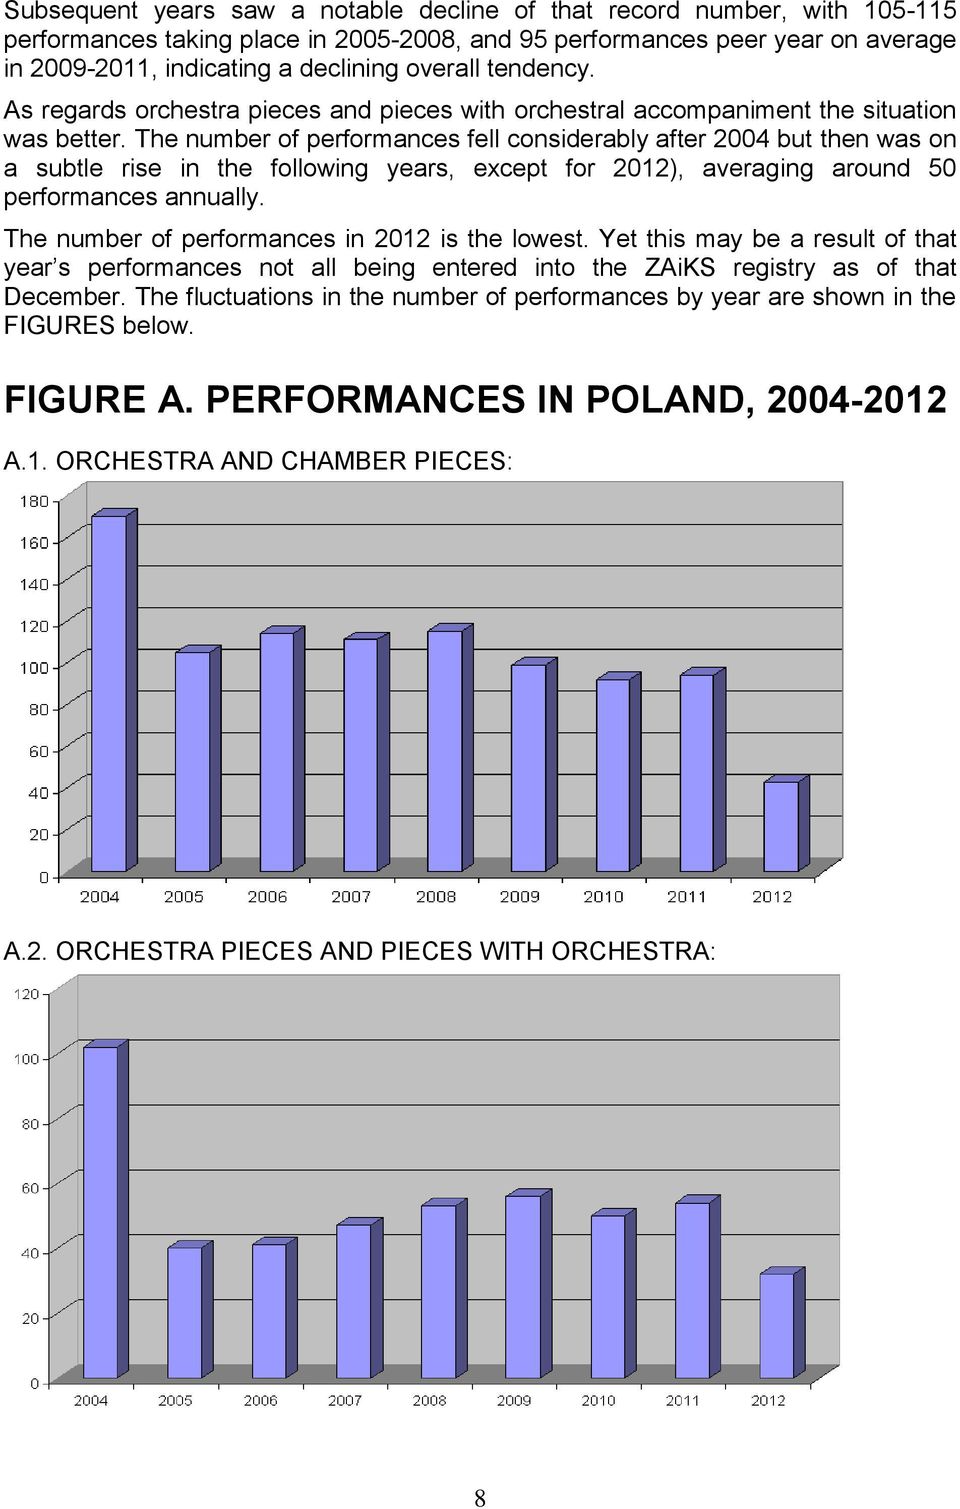 The number of performances fell considerably after 2004 but then was on a subtle rise in the following years, except for 2012), averaging around 50 performances annually.